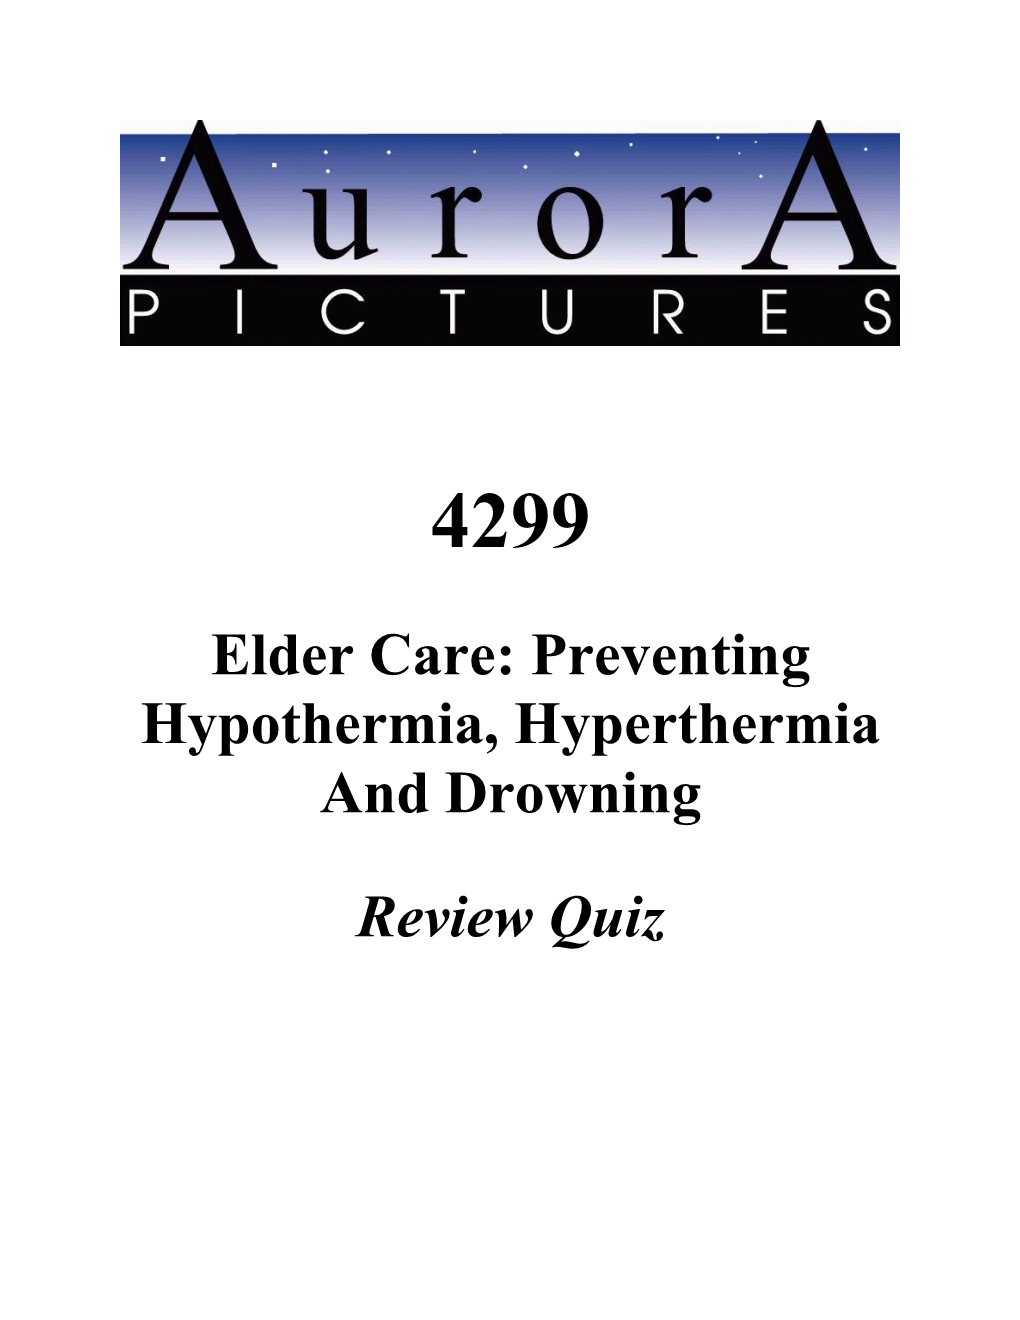 Elder Care: Preventing Hypothermia, Hyperthermia and Drowning